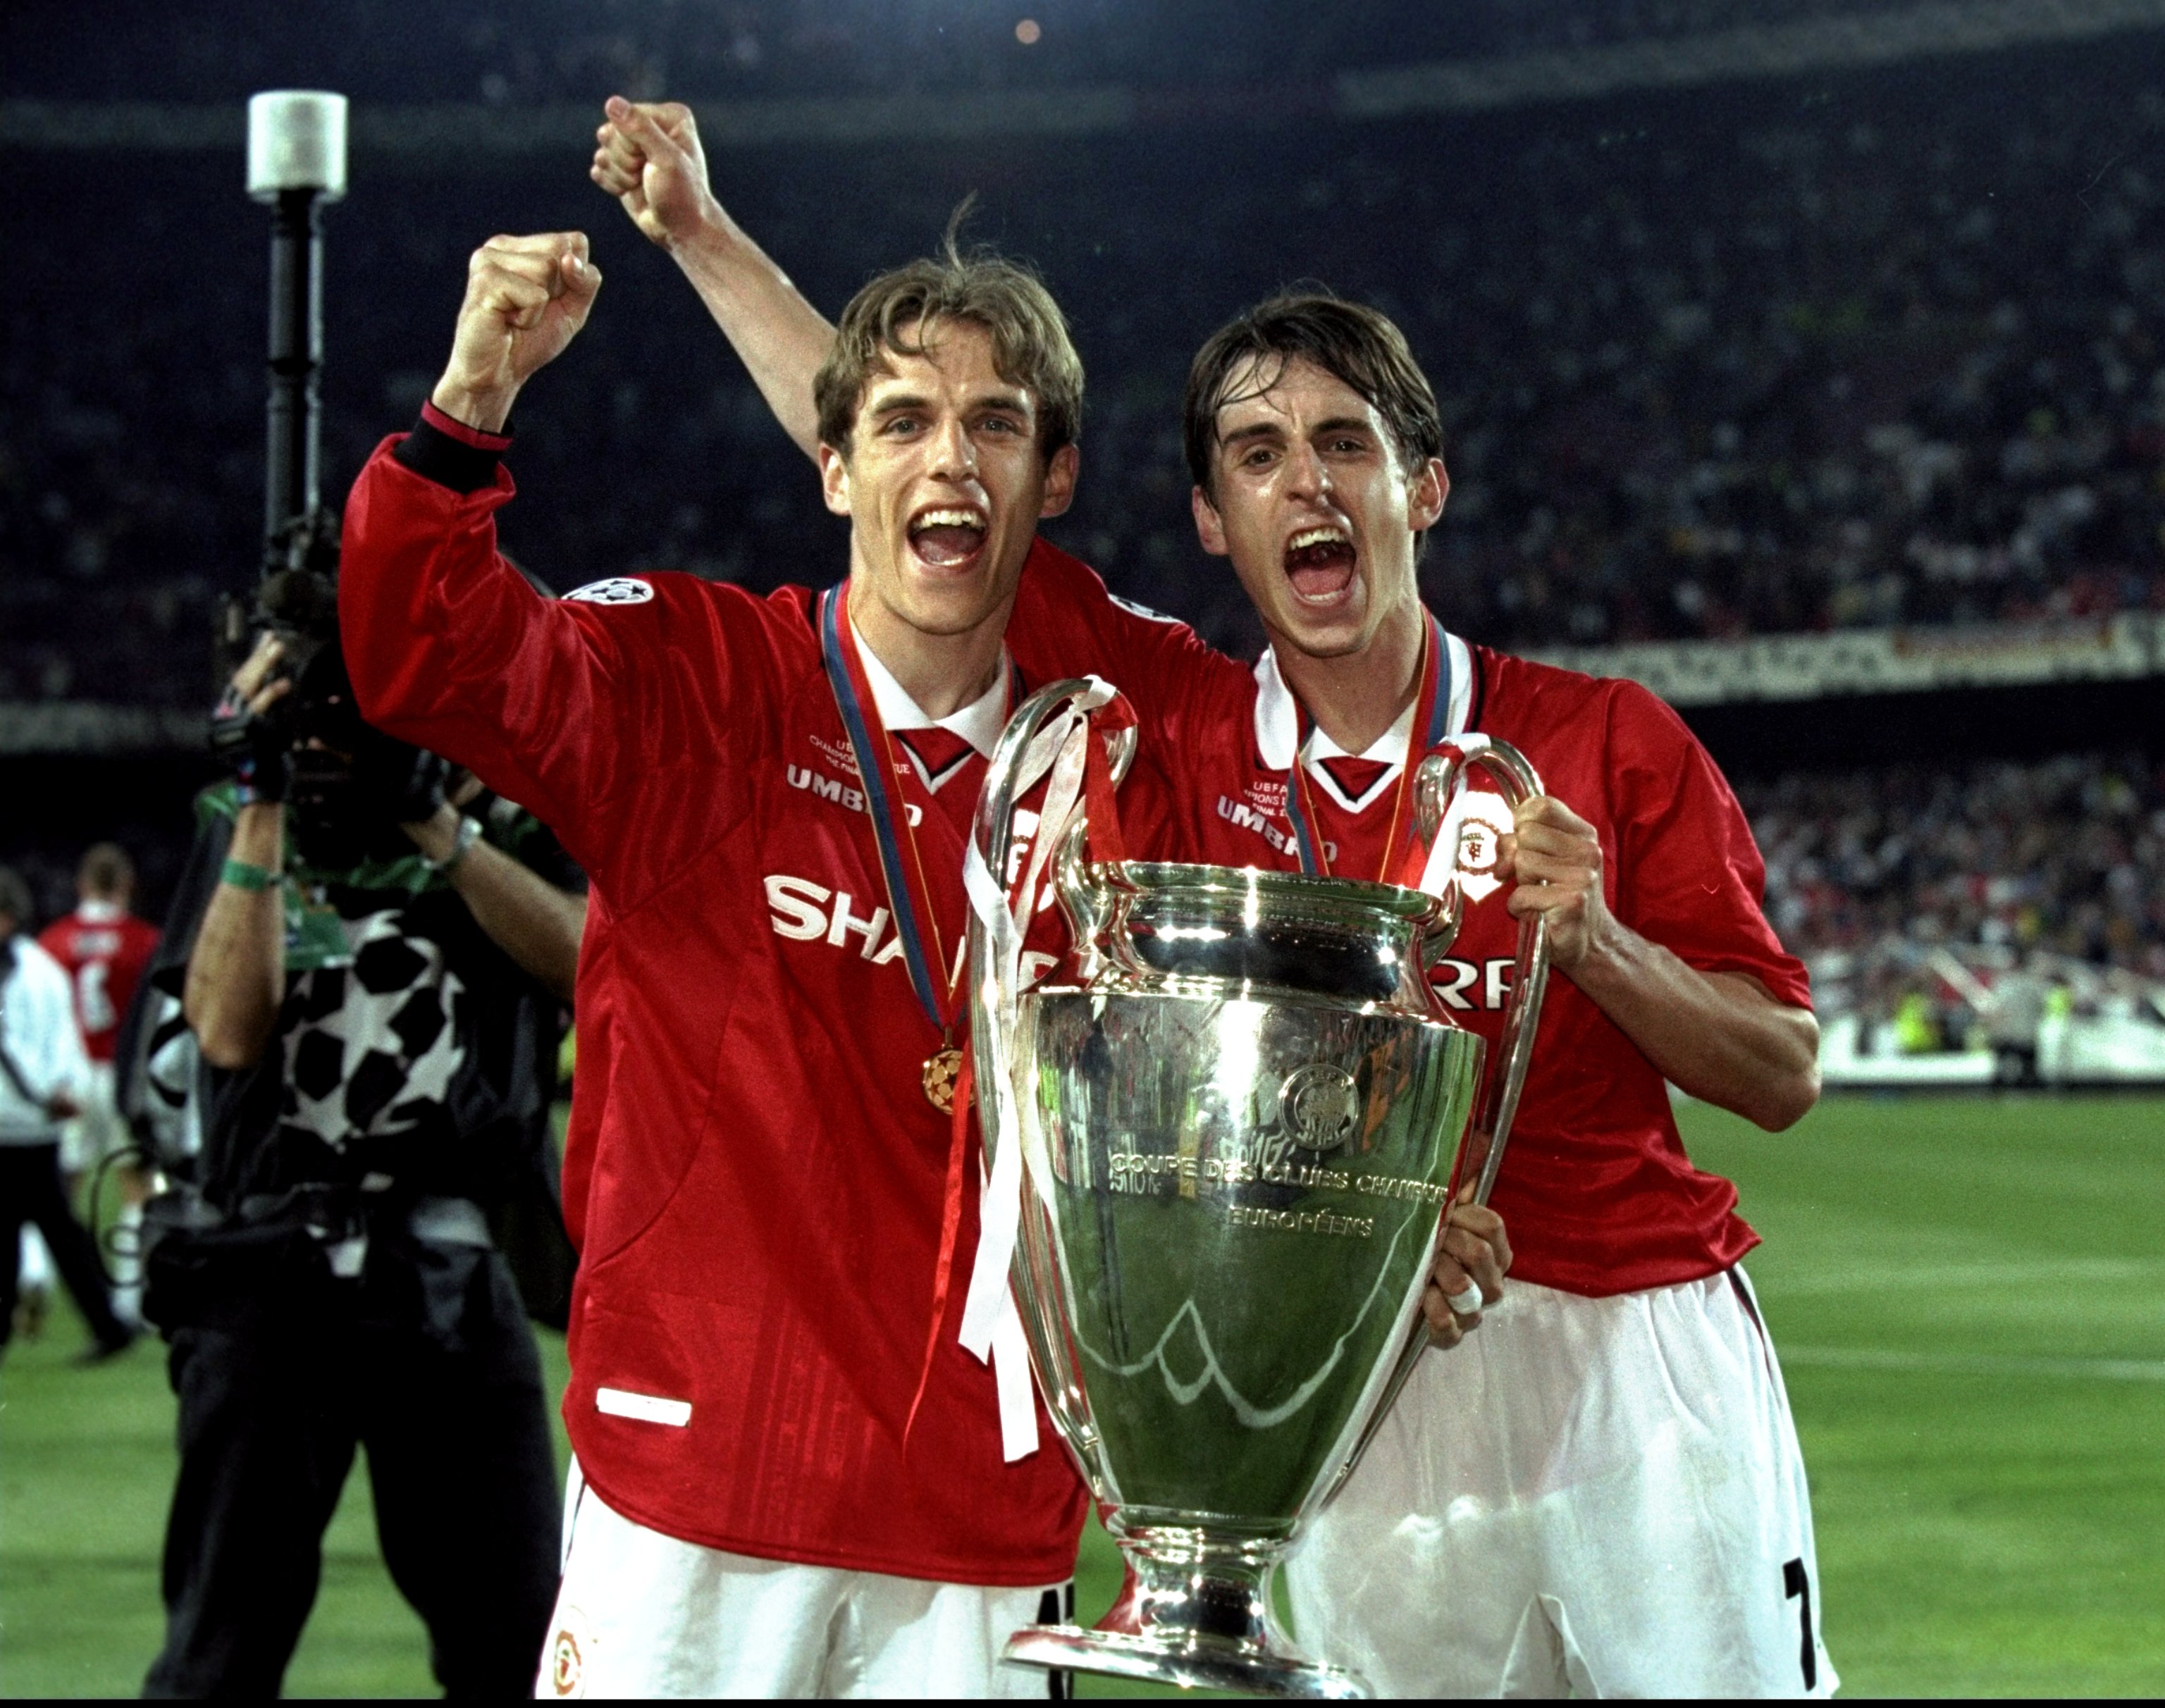 26 May 1999:  Brothers Phillip and Gary Neville of Manchester United with the European Cup after United beat Bayern Munich in the European Champions League Final in the Nou Camp Stadium, Barcelona, Spain. Manchester United won 2 - 1 with both United goals